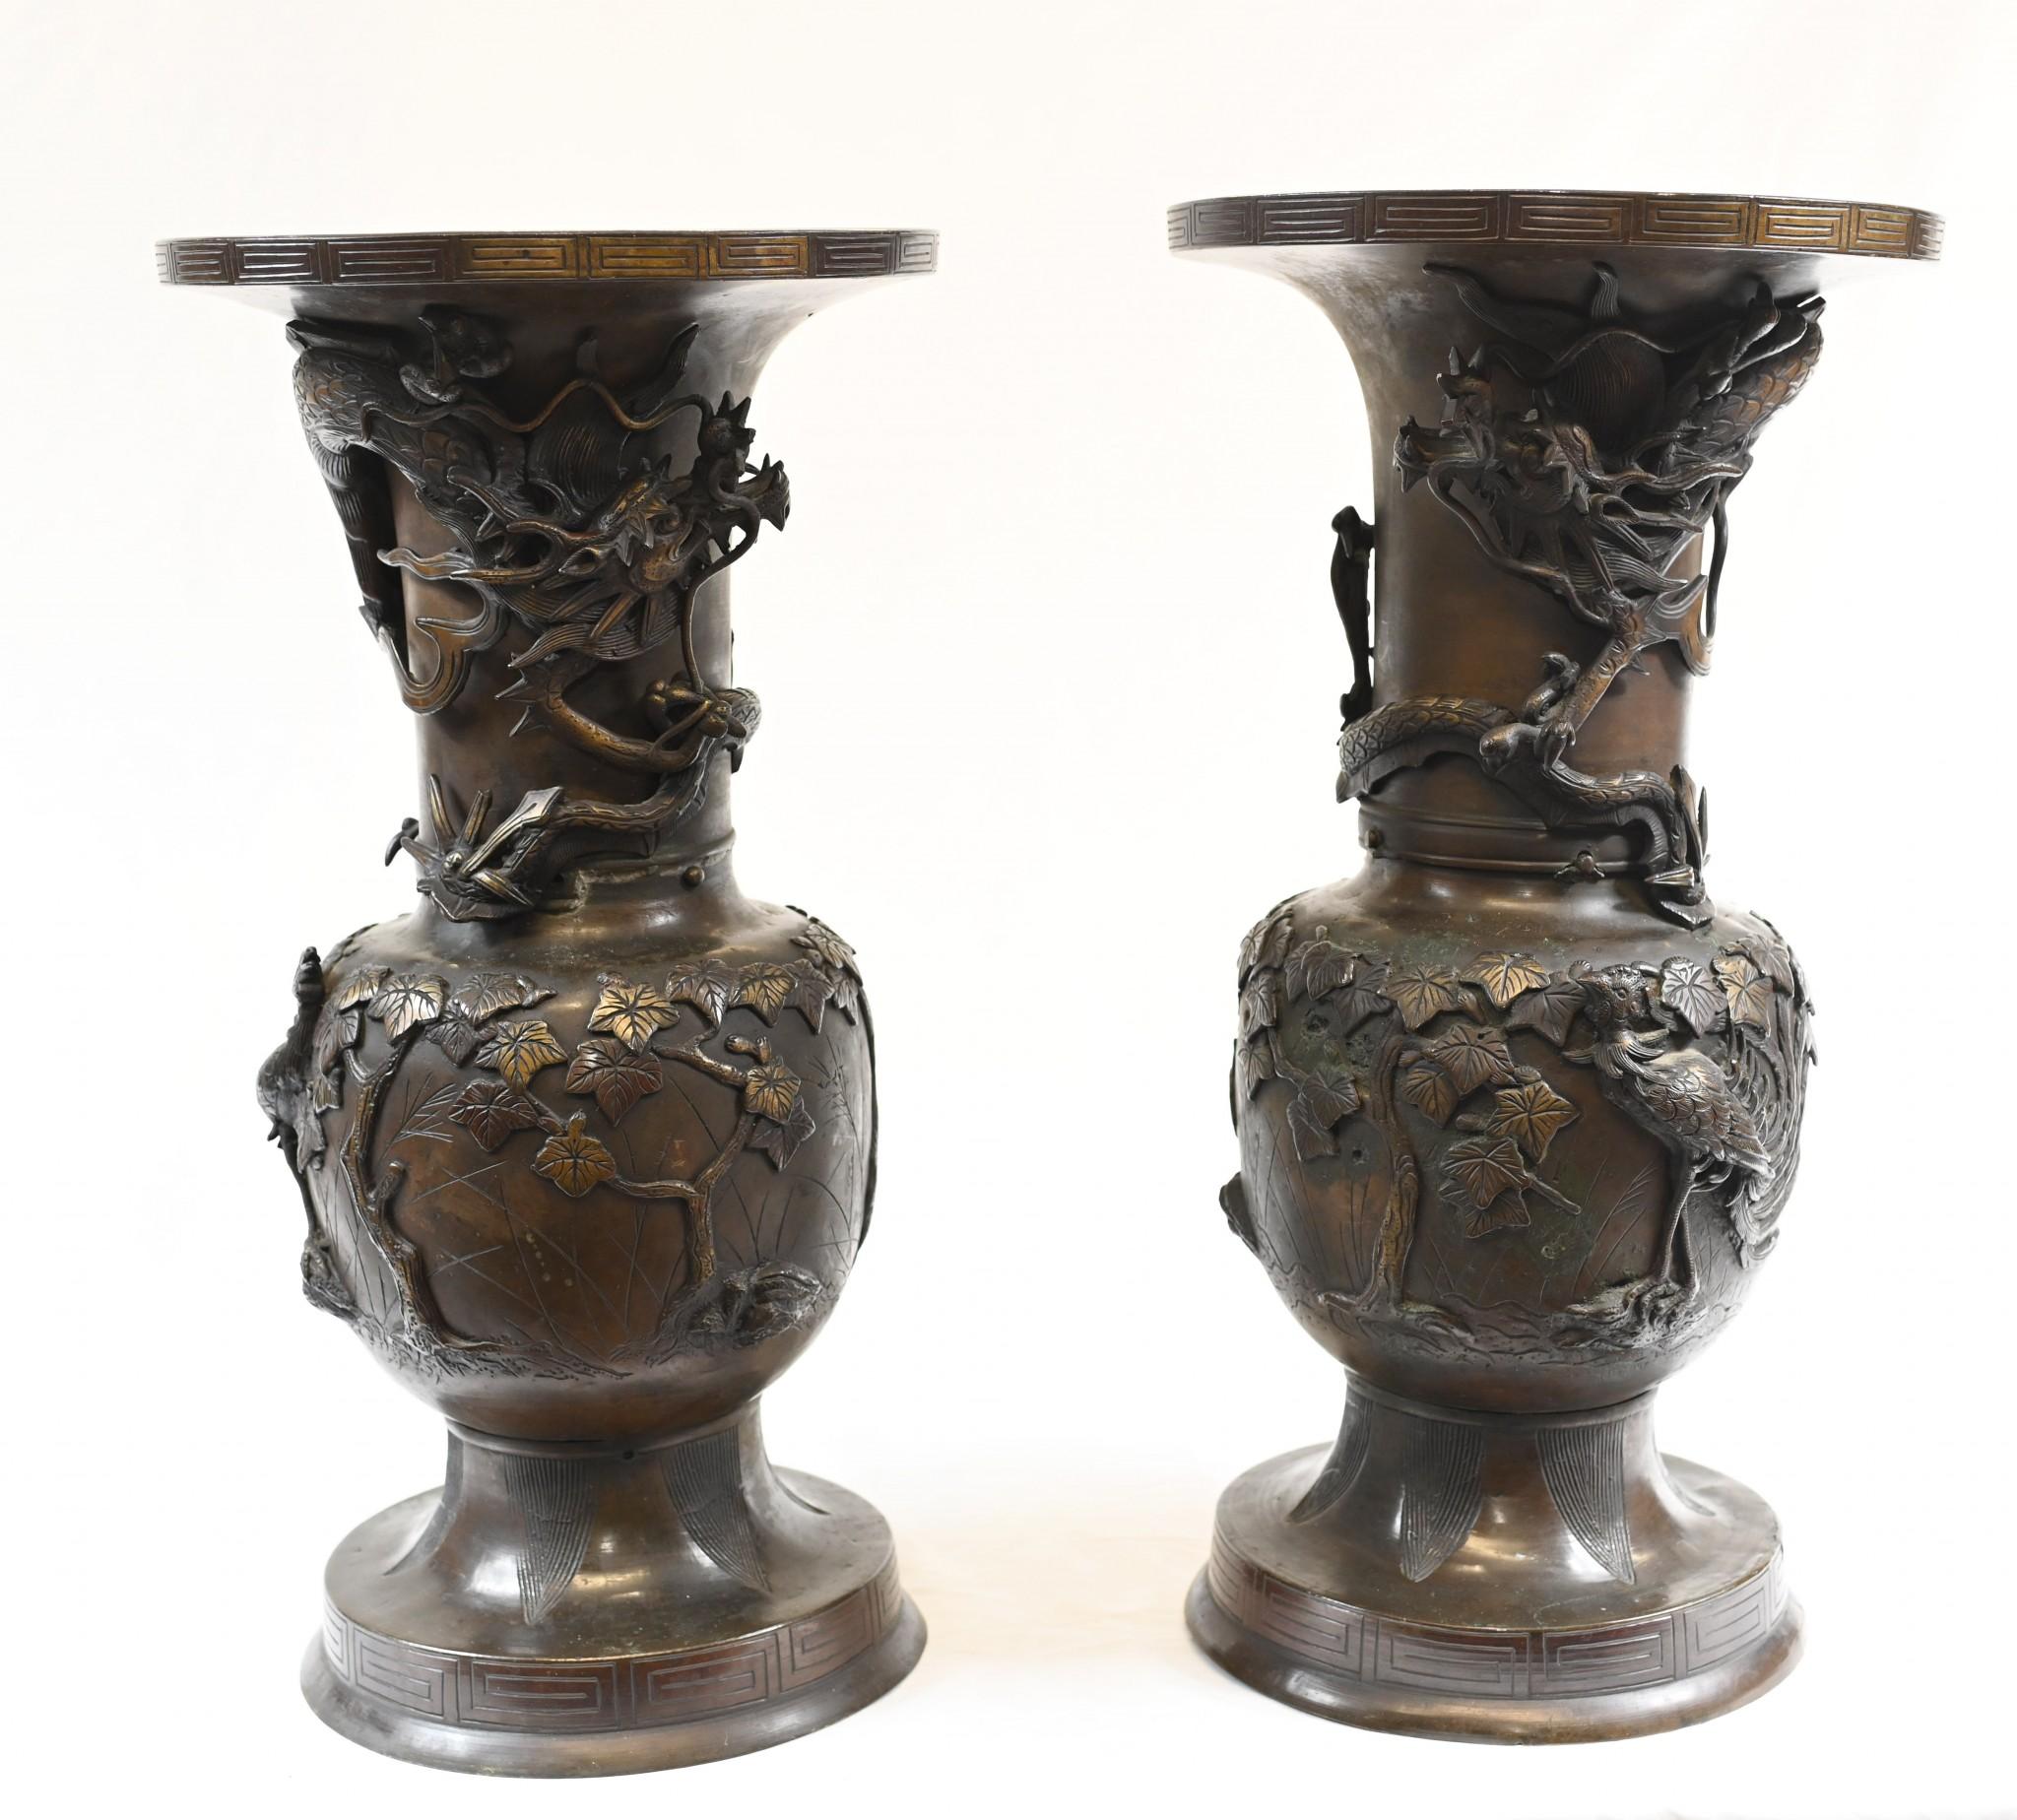 Pair of Japanese bronze vases highly decorated with leaves and plants
Decorated with amazing dragons in relief around the urn
Also features foliage and birds
Circa 1880 
Some of our items are in storage so please check ahead of a viewing to see